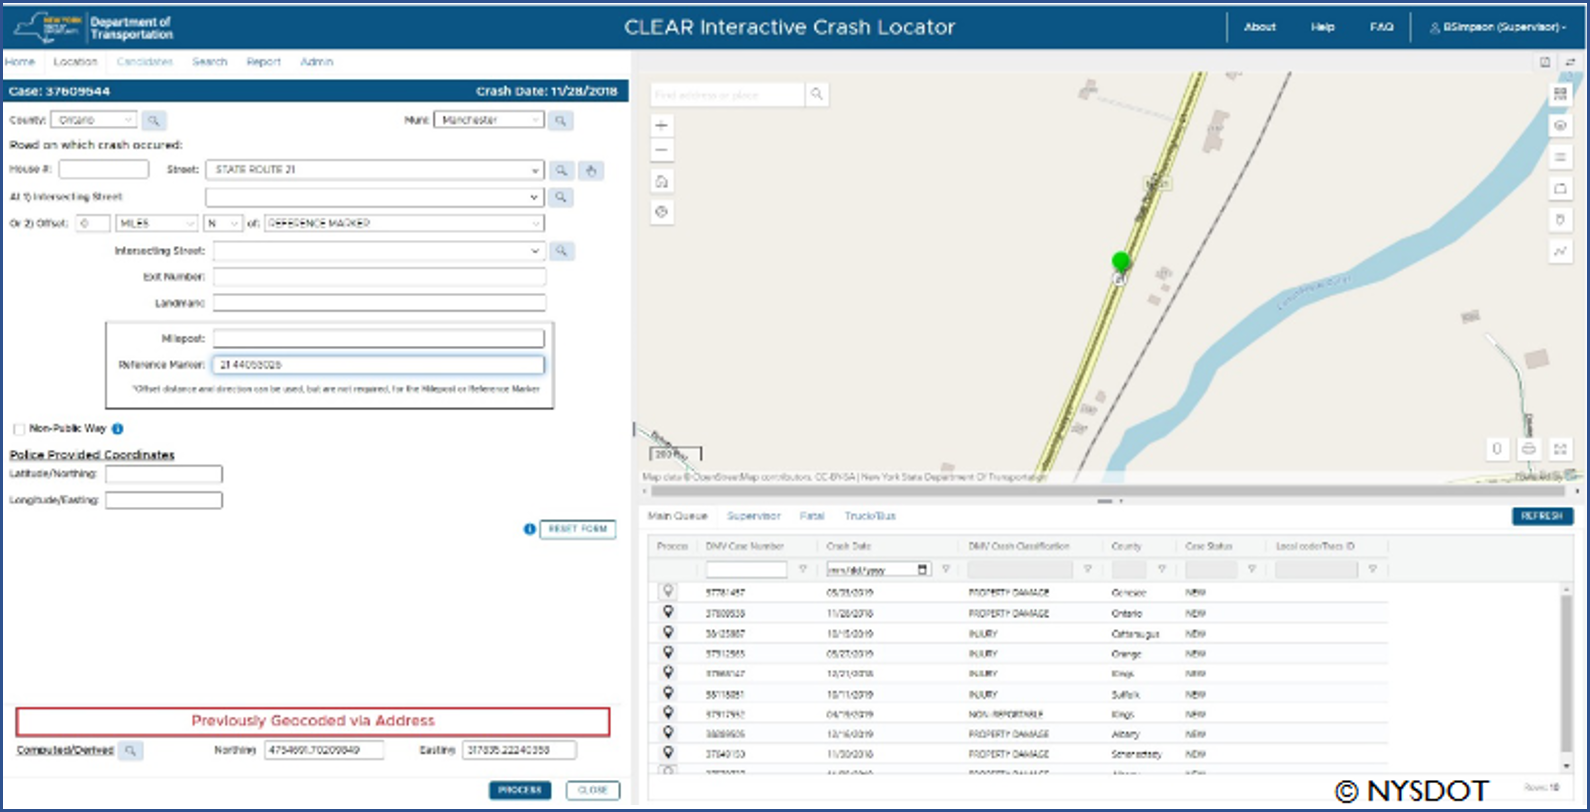 screenshot of NYSDOT’s CLEAR Interactive Crash Locator displaying (1) search input, (2) a map with selectable layers showing the location of a vehicle crash, and (3) data about that vehicle crash location